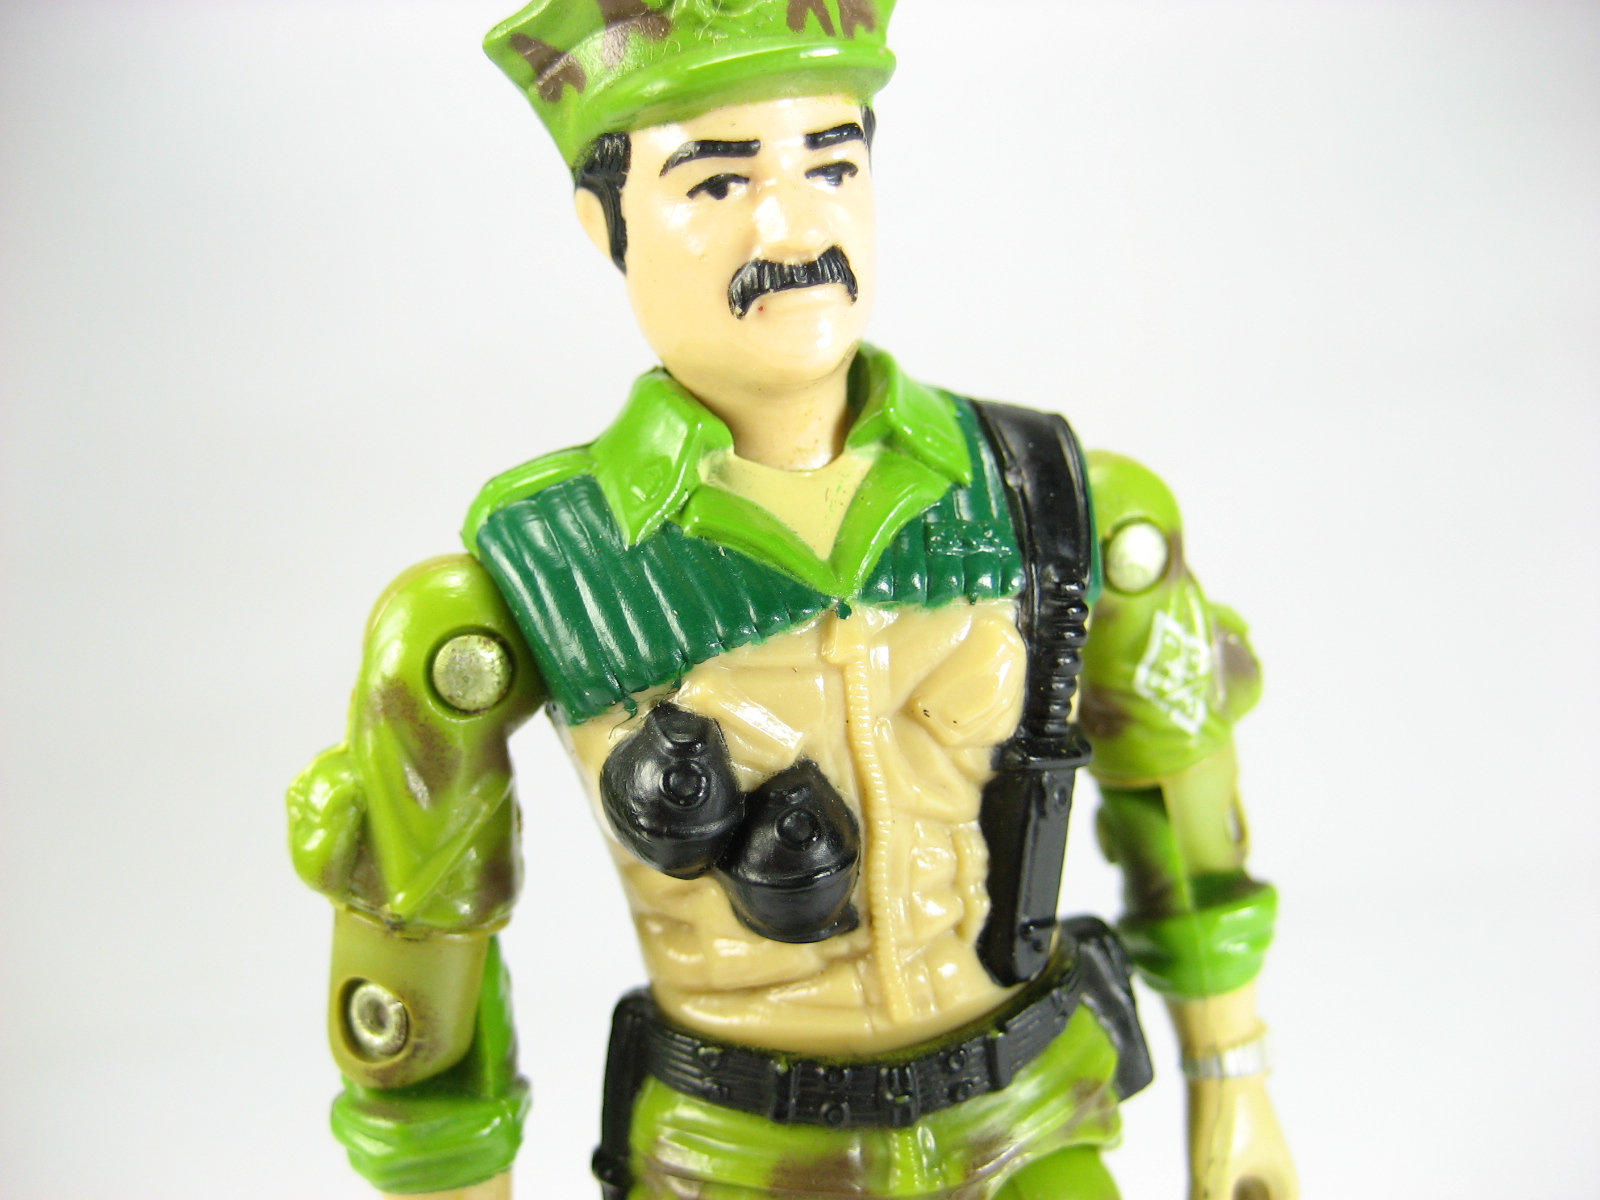 a toy figure is posed in green and tan